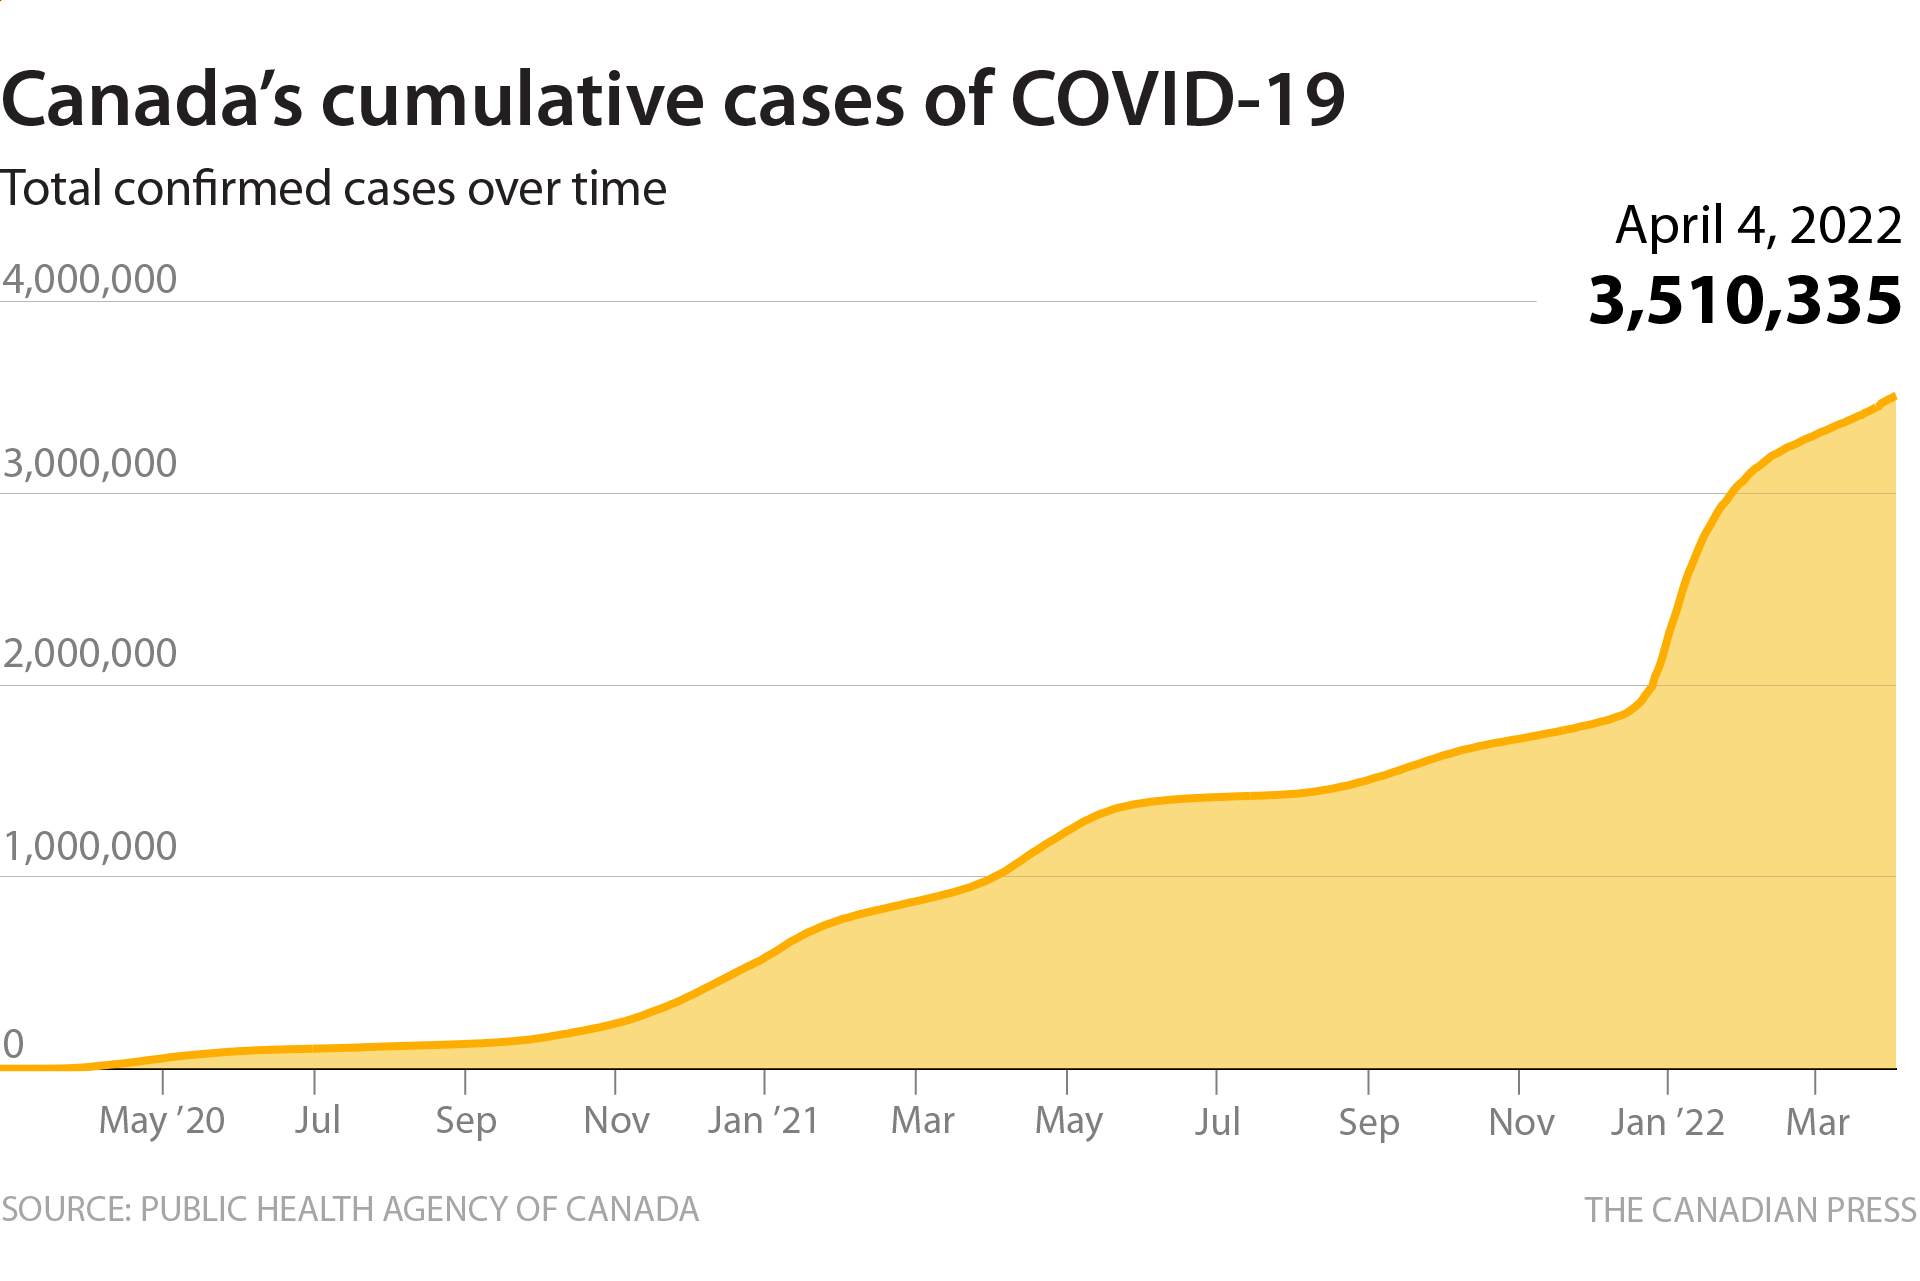 CANADA COVID CASES OVER TIME